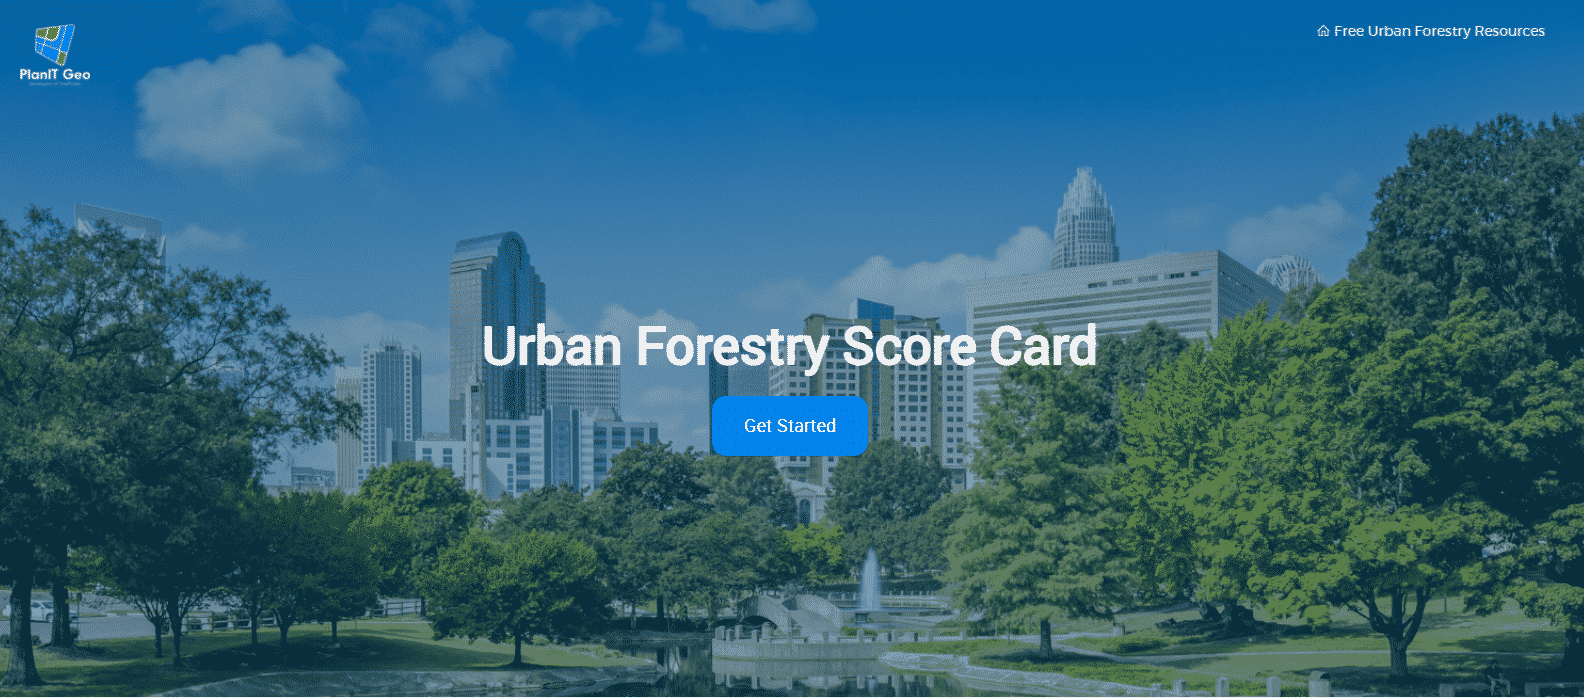 Take the 9 question Urban Forestry Scorecard quiz from PlanIT Geo